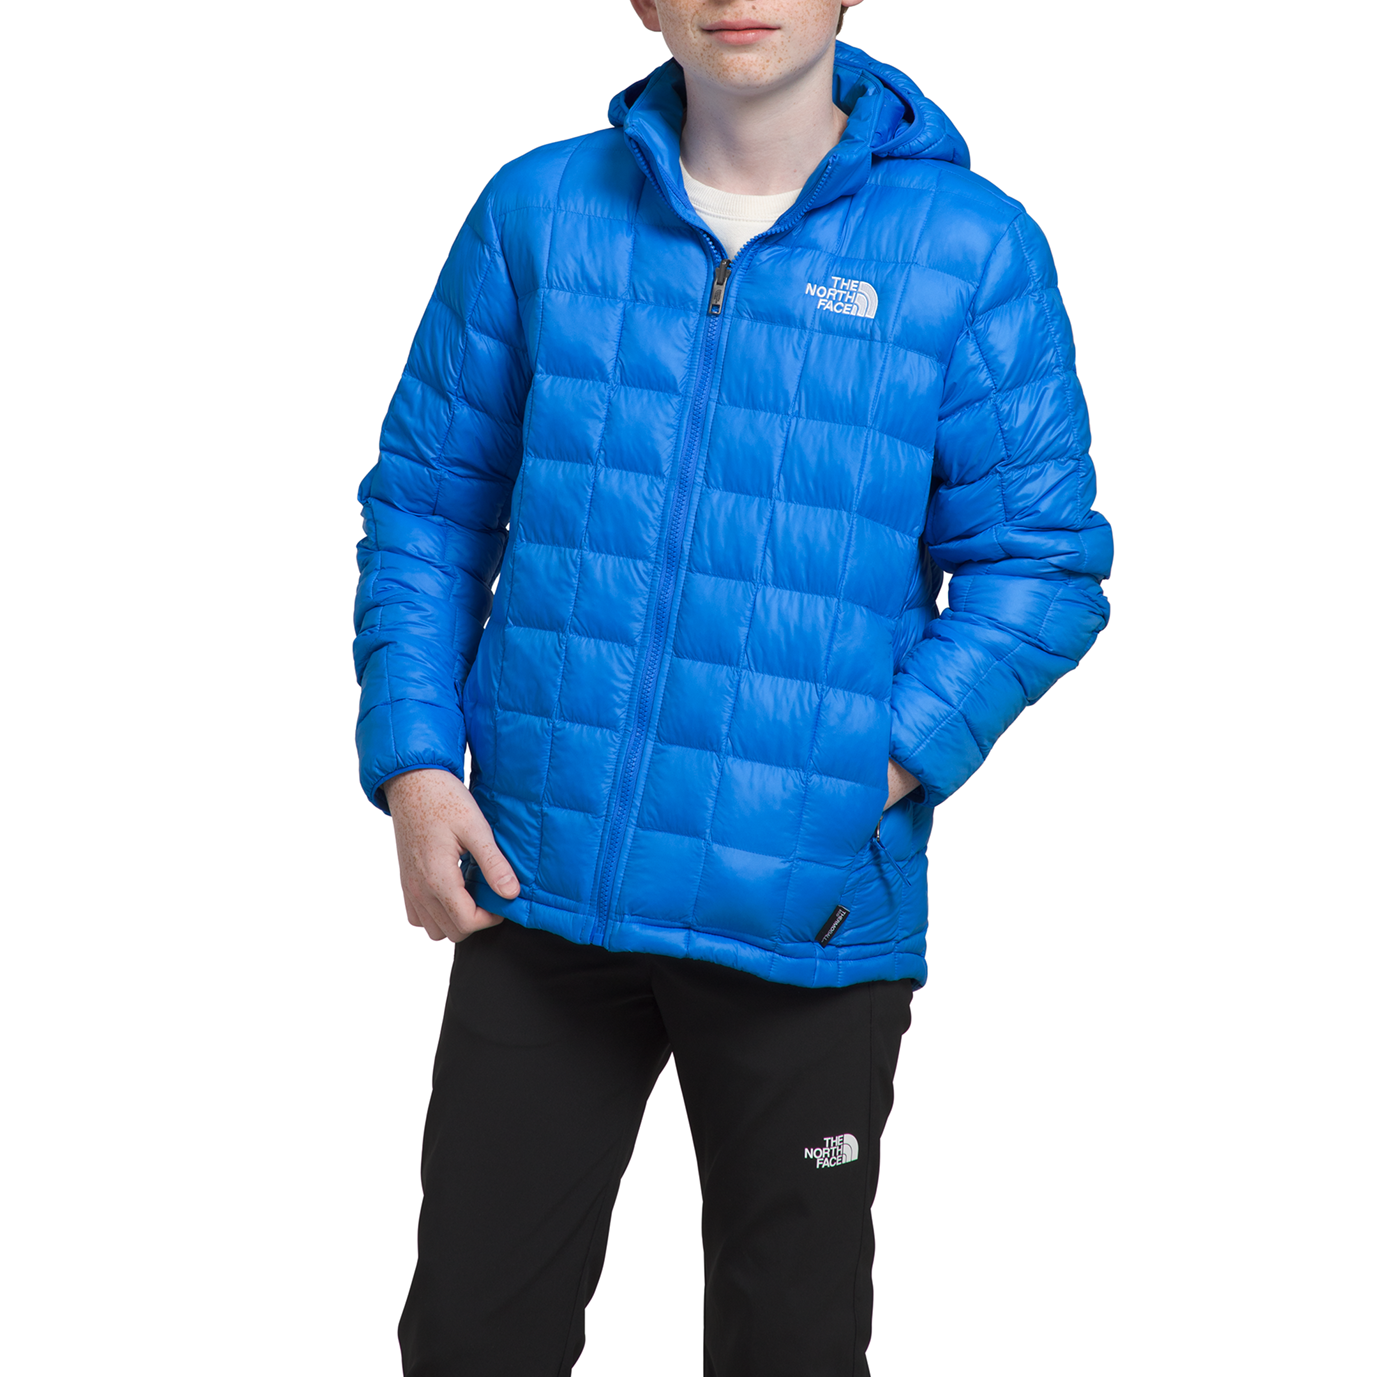 Куртка The North Face ThermoBall Hooded, синий куртка the north face thermoball hooded синий